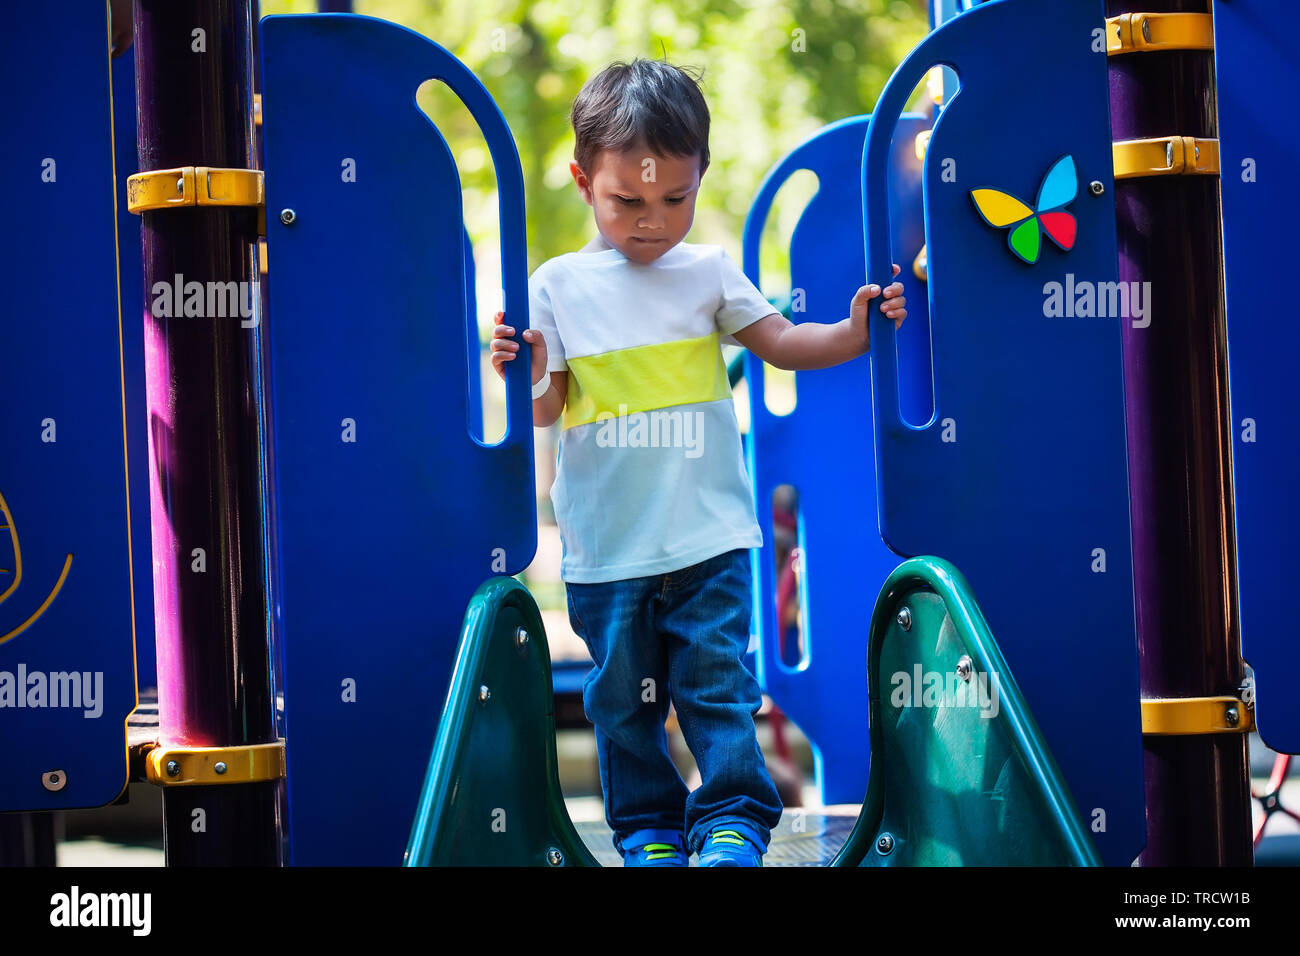 3 year old boy looks unsure about going down a slide as he looks down at the edge of the playground slide. Stock Photo